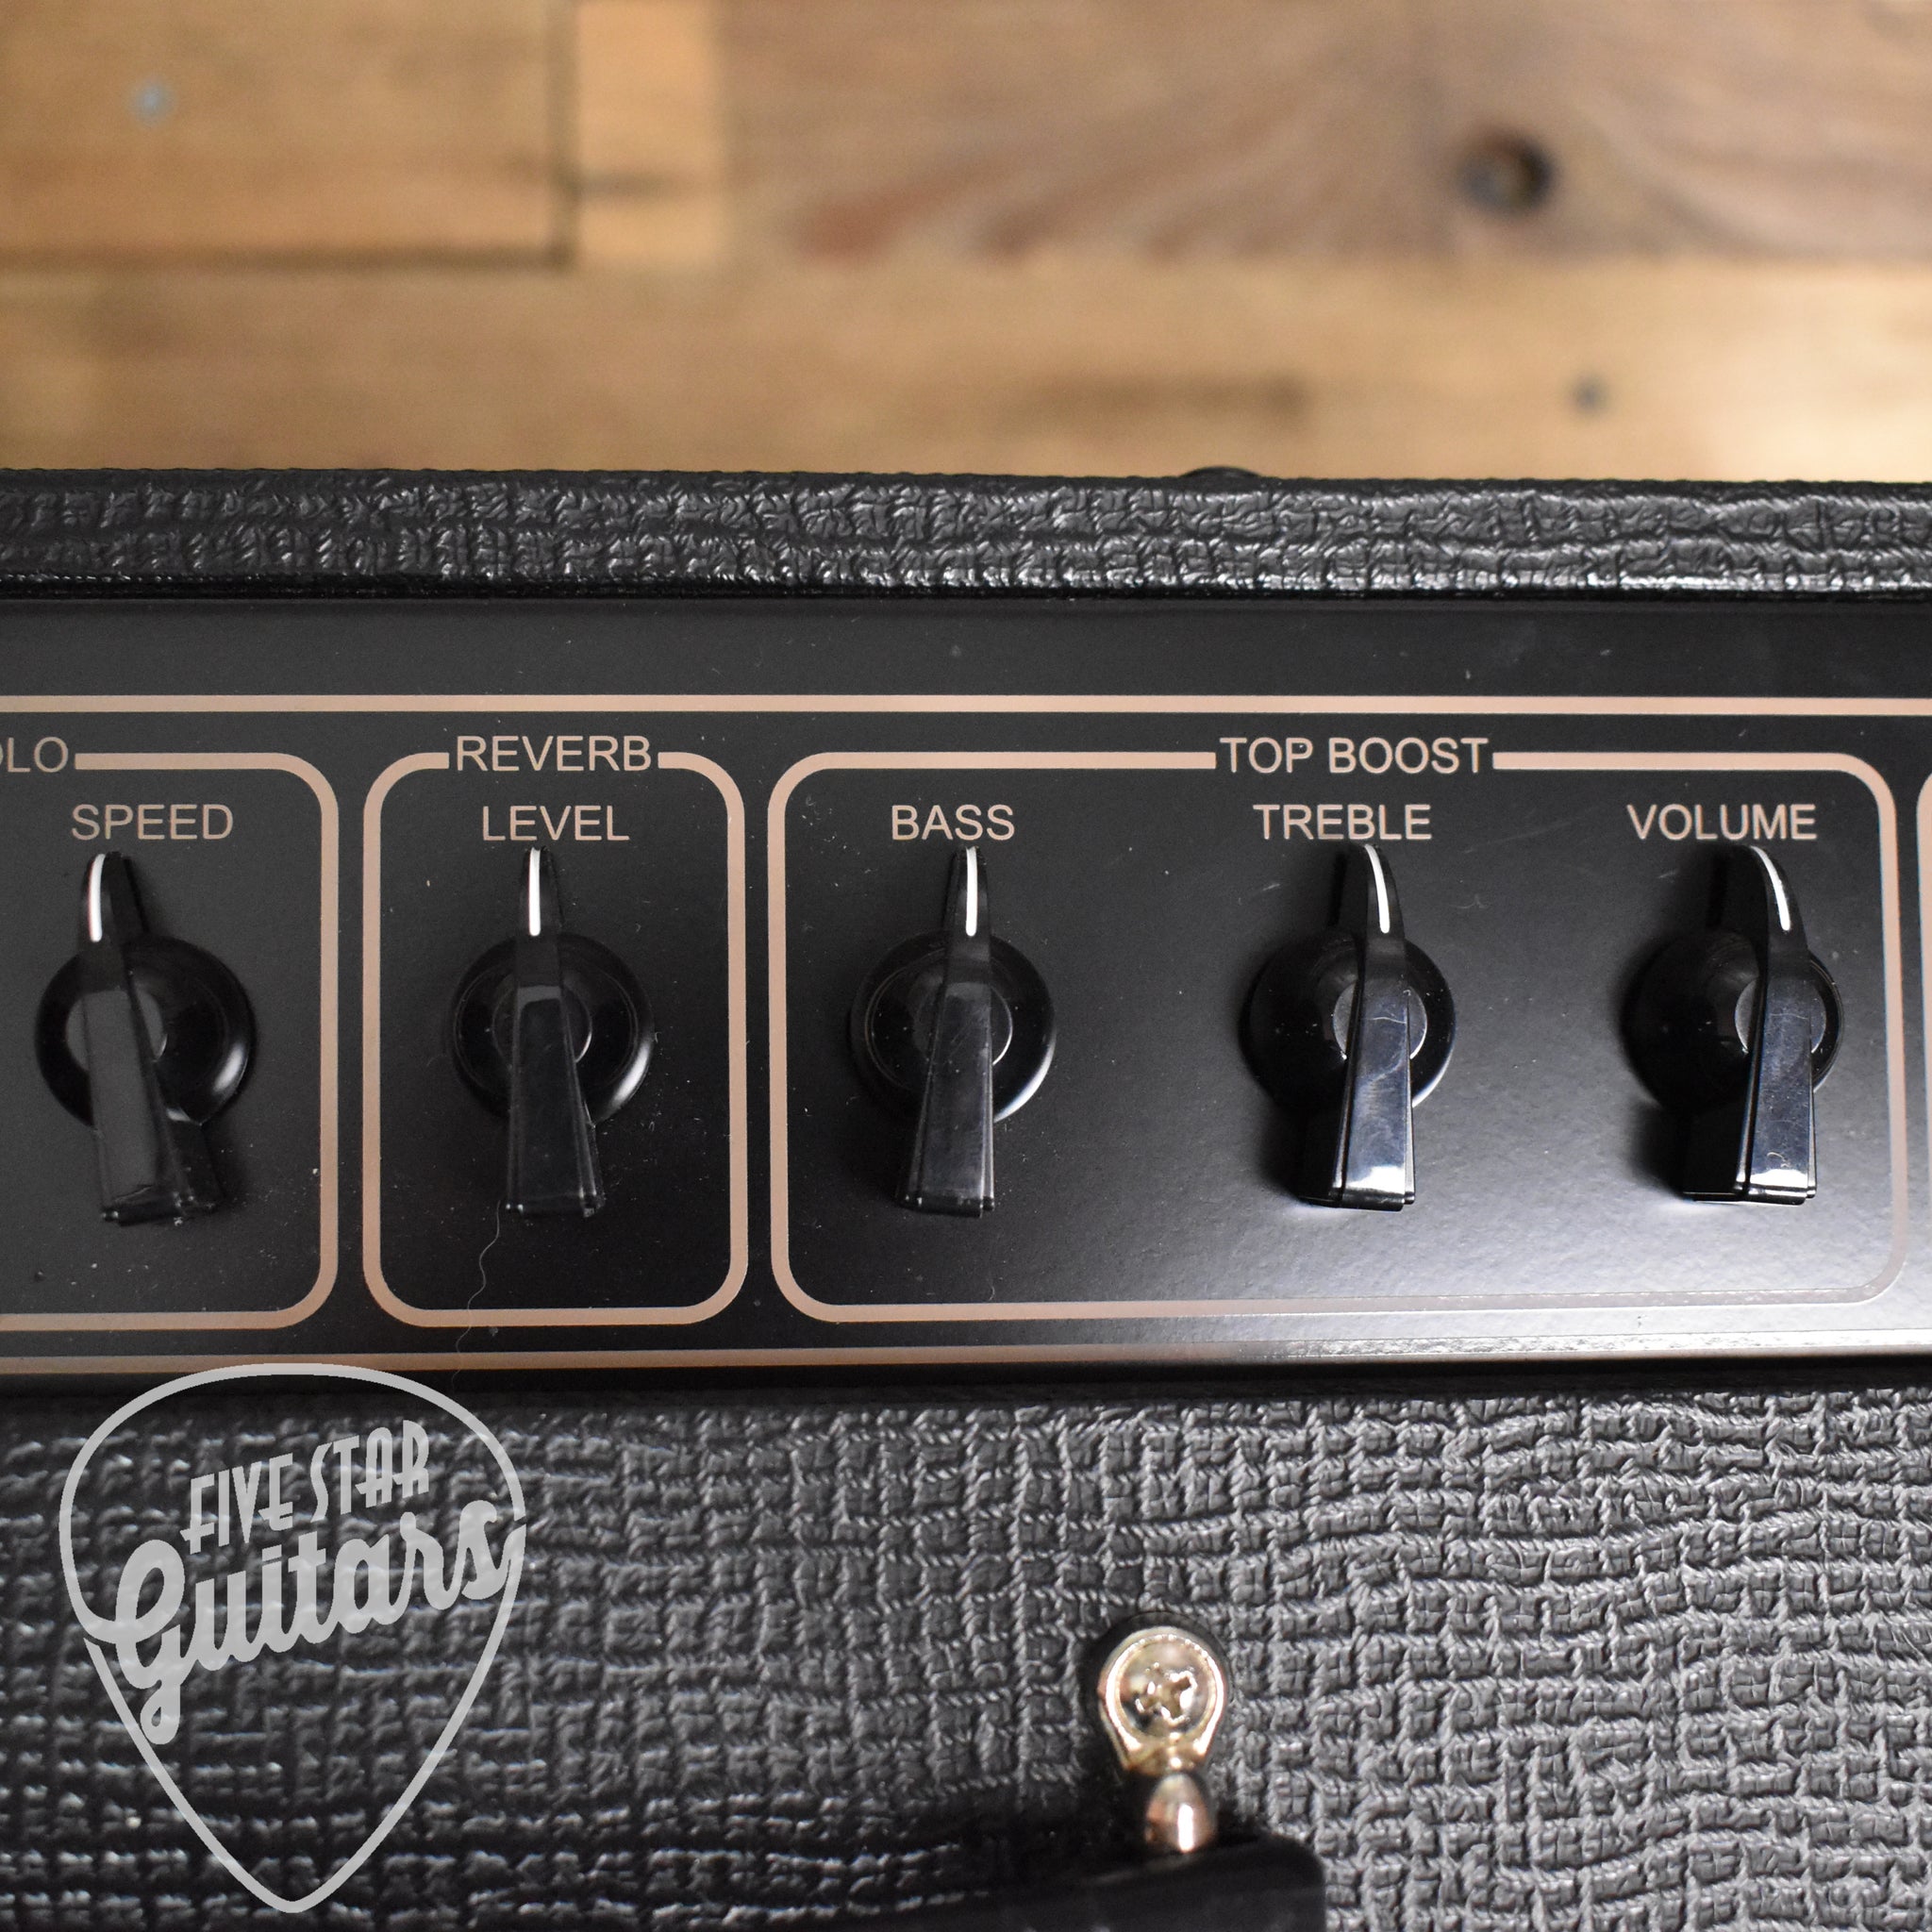 The AC10 Custom - One of the First and Most Loved of Vox Amps